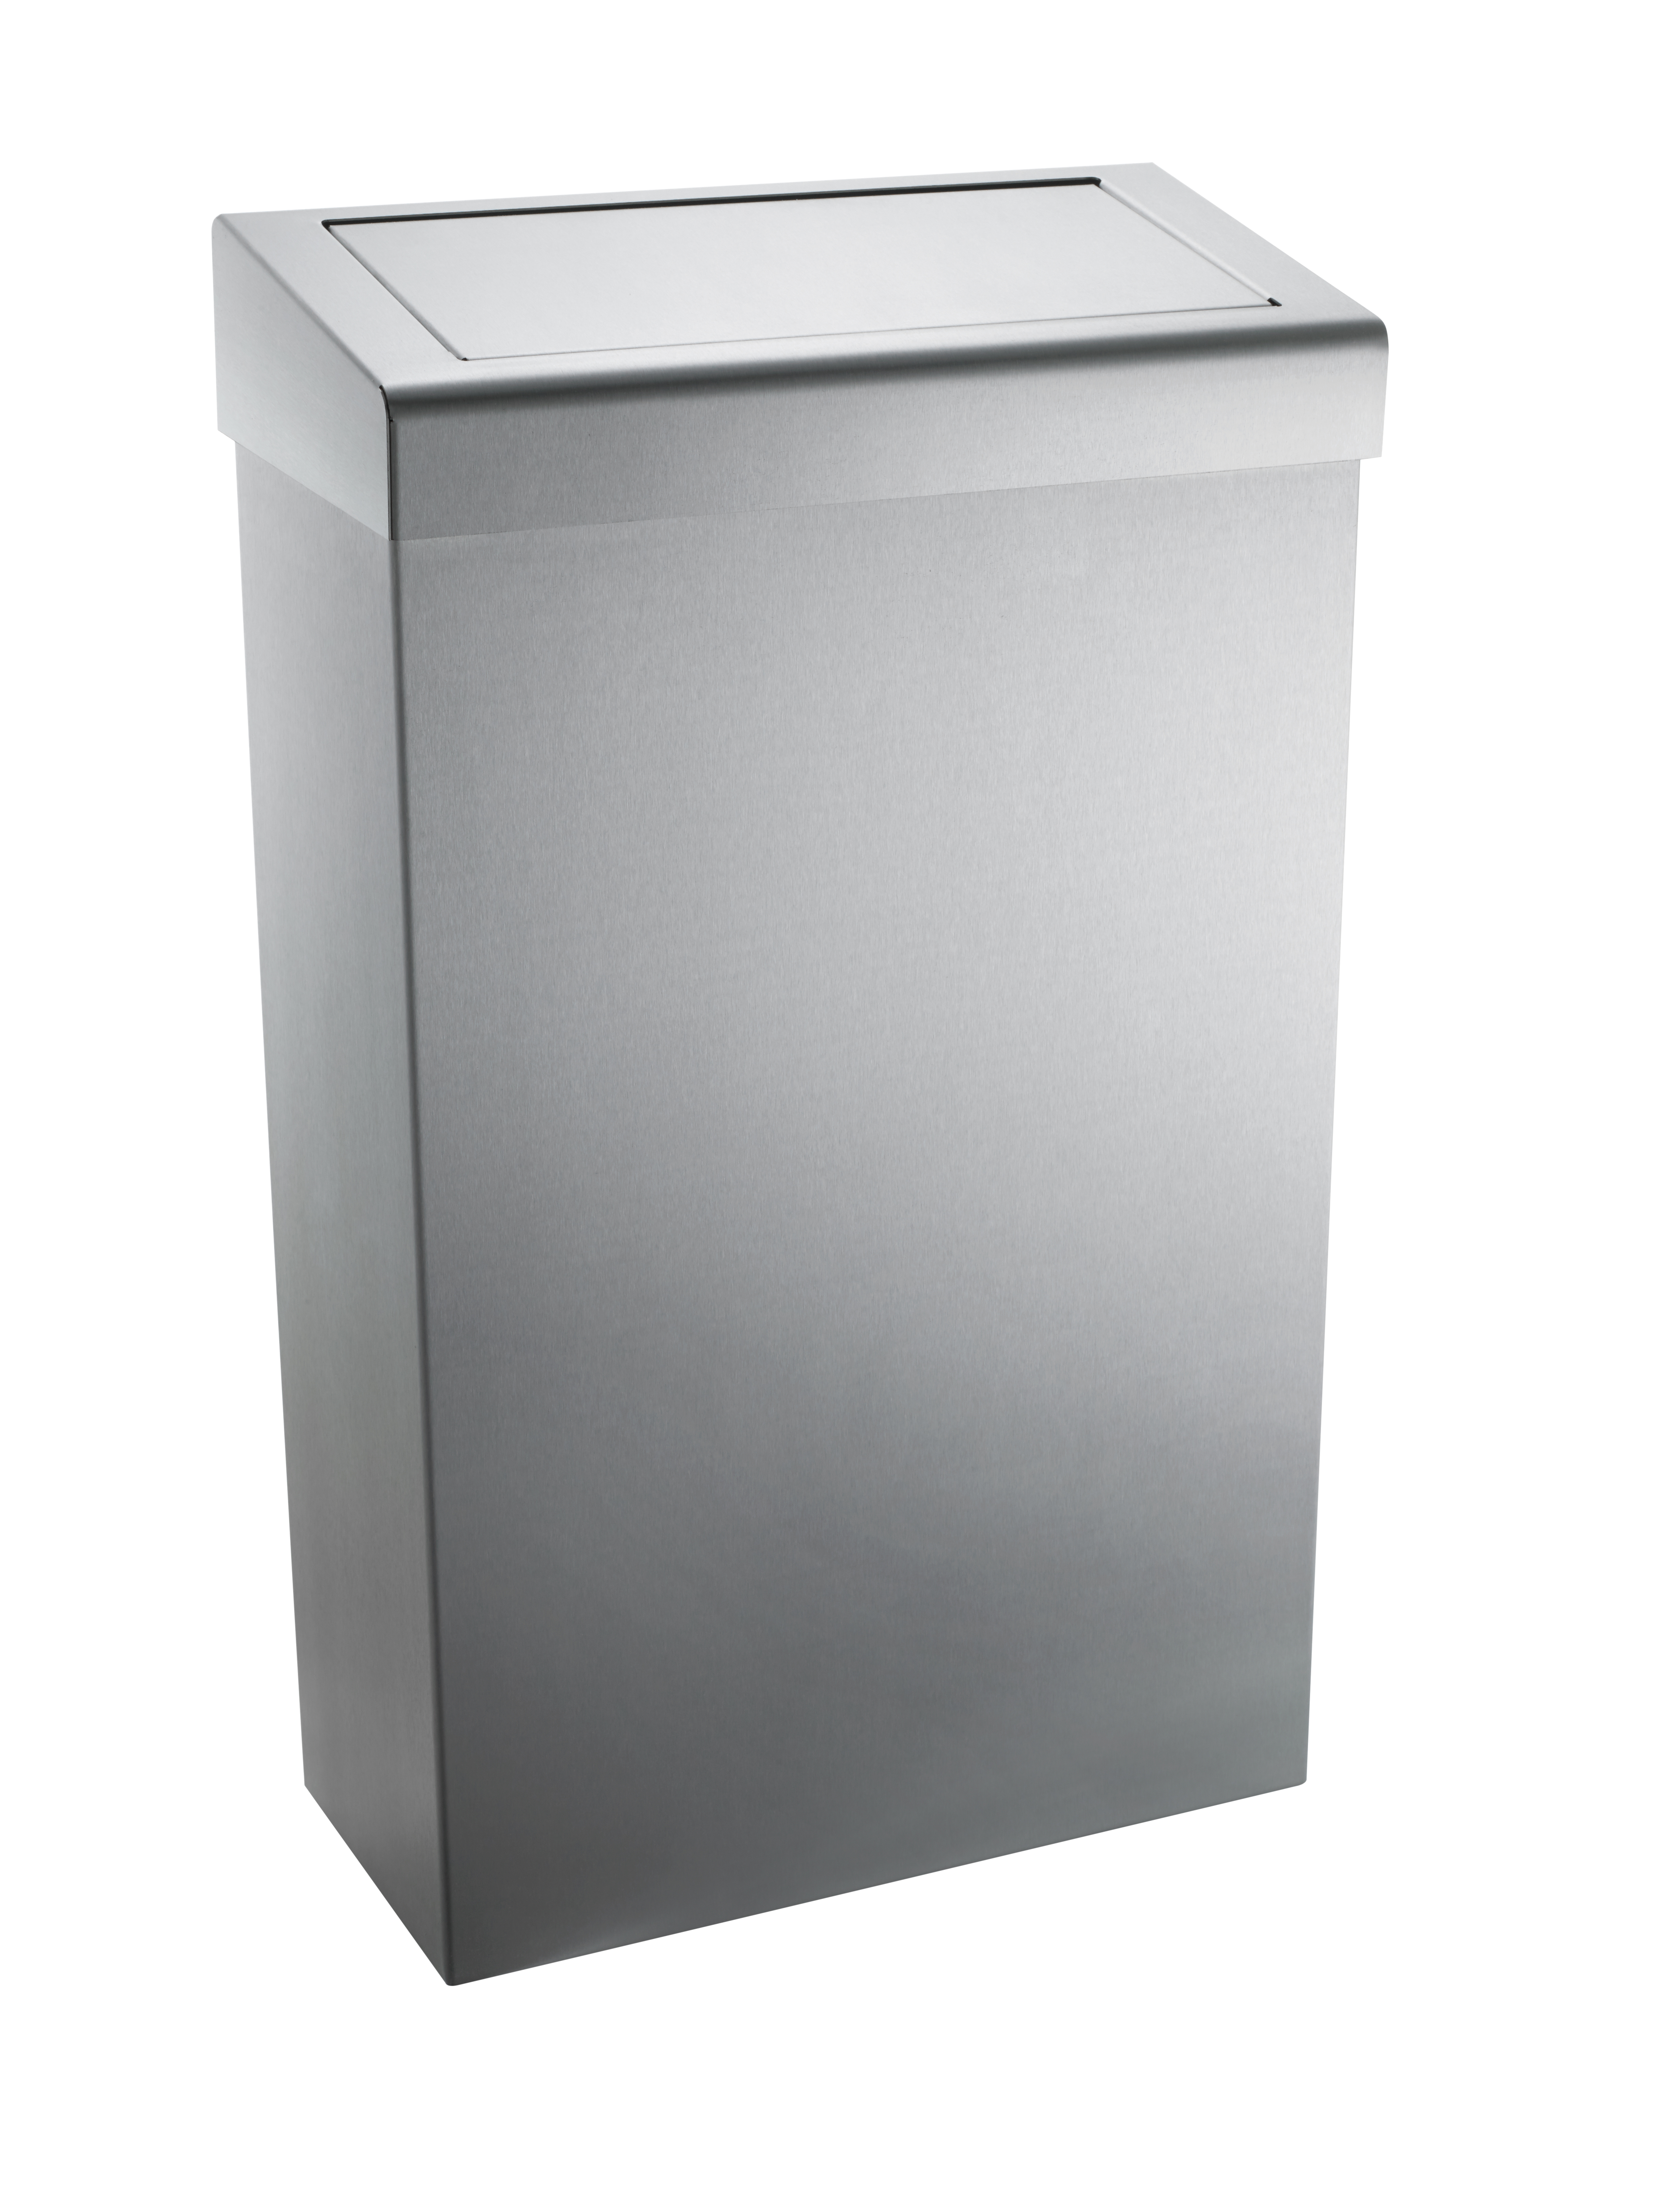 Waste Bin 30ltr With Flap Lid Stainless Steel 73SS